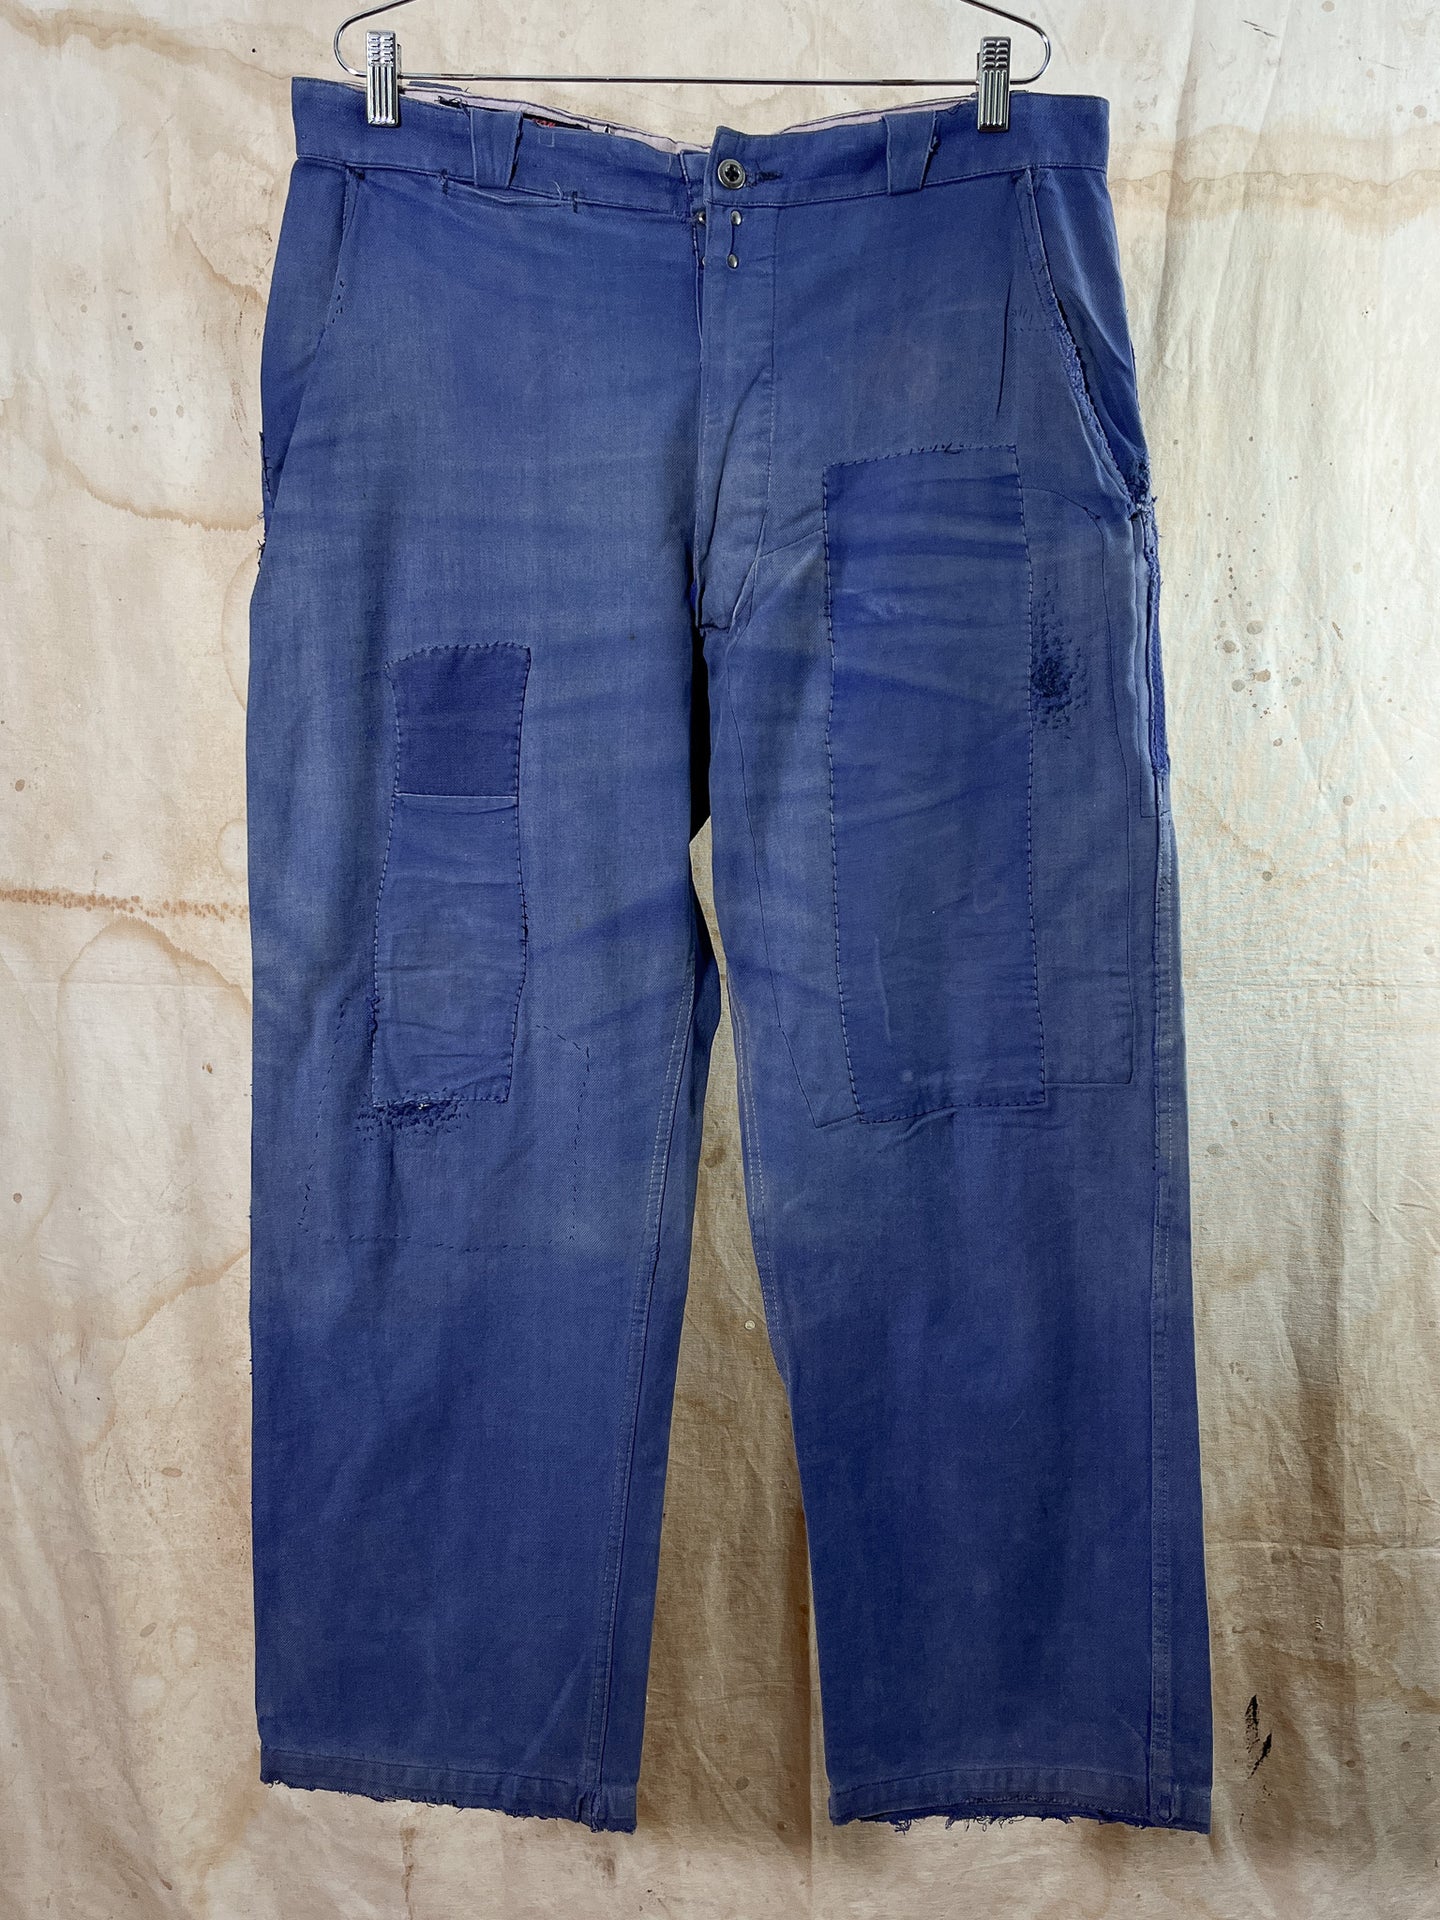 French Blue Cotton Twill Patched & Repaired Work Trousers c. 1950s